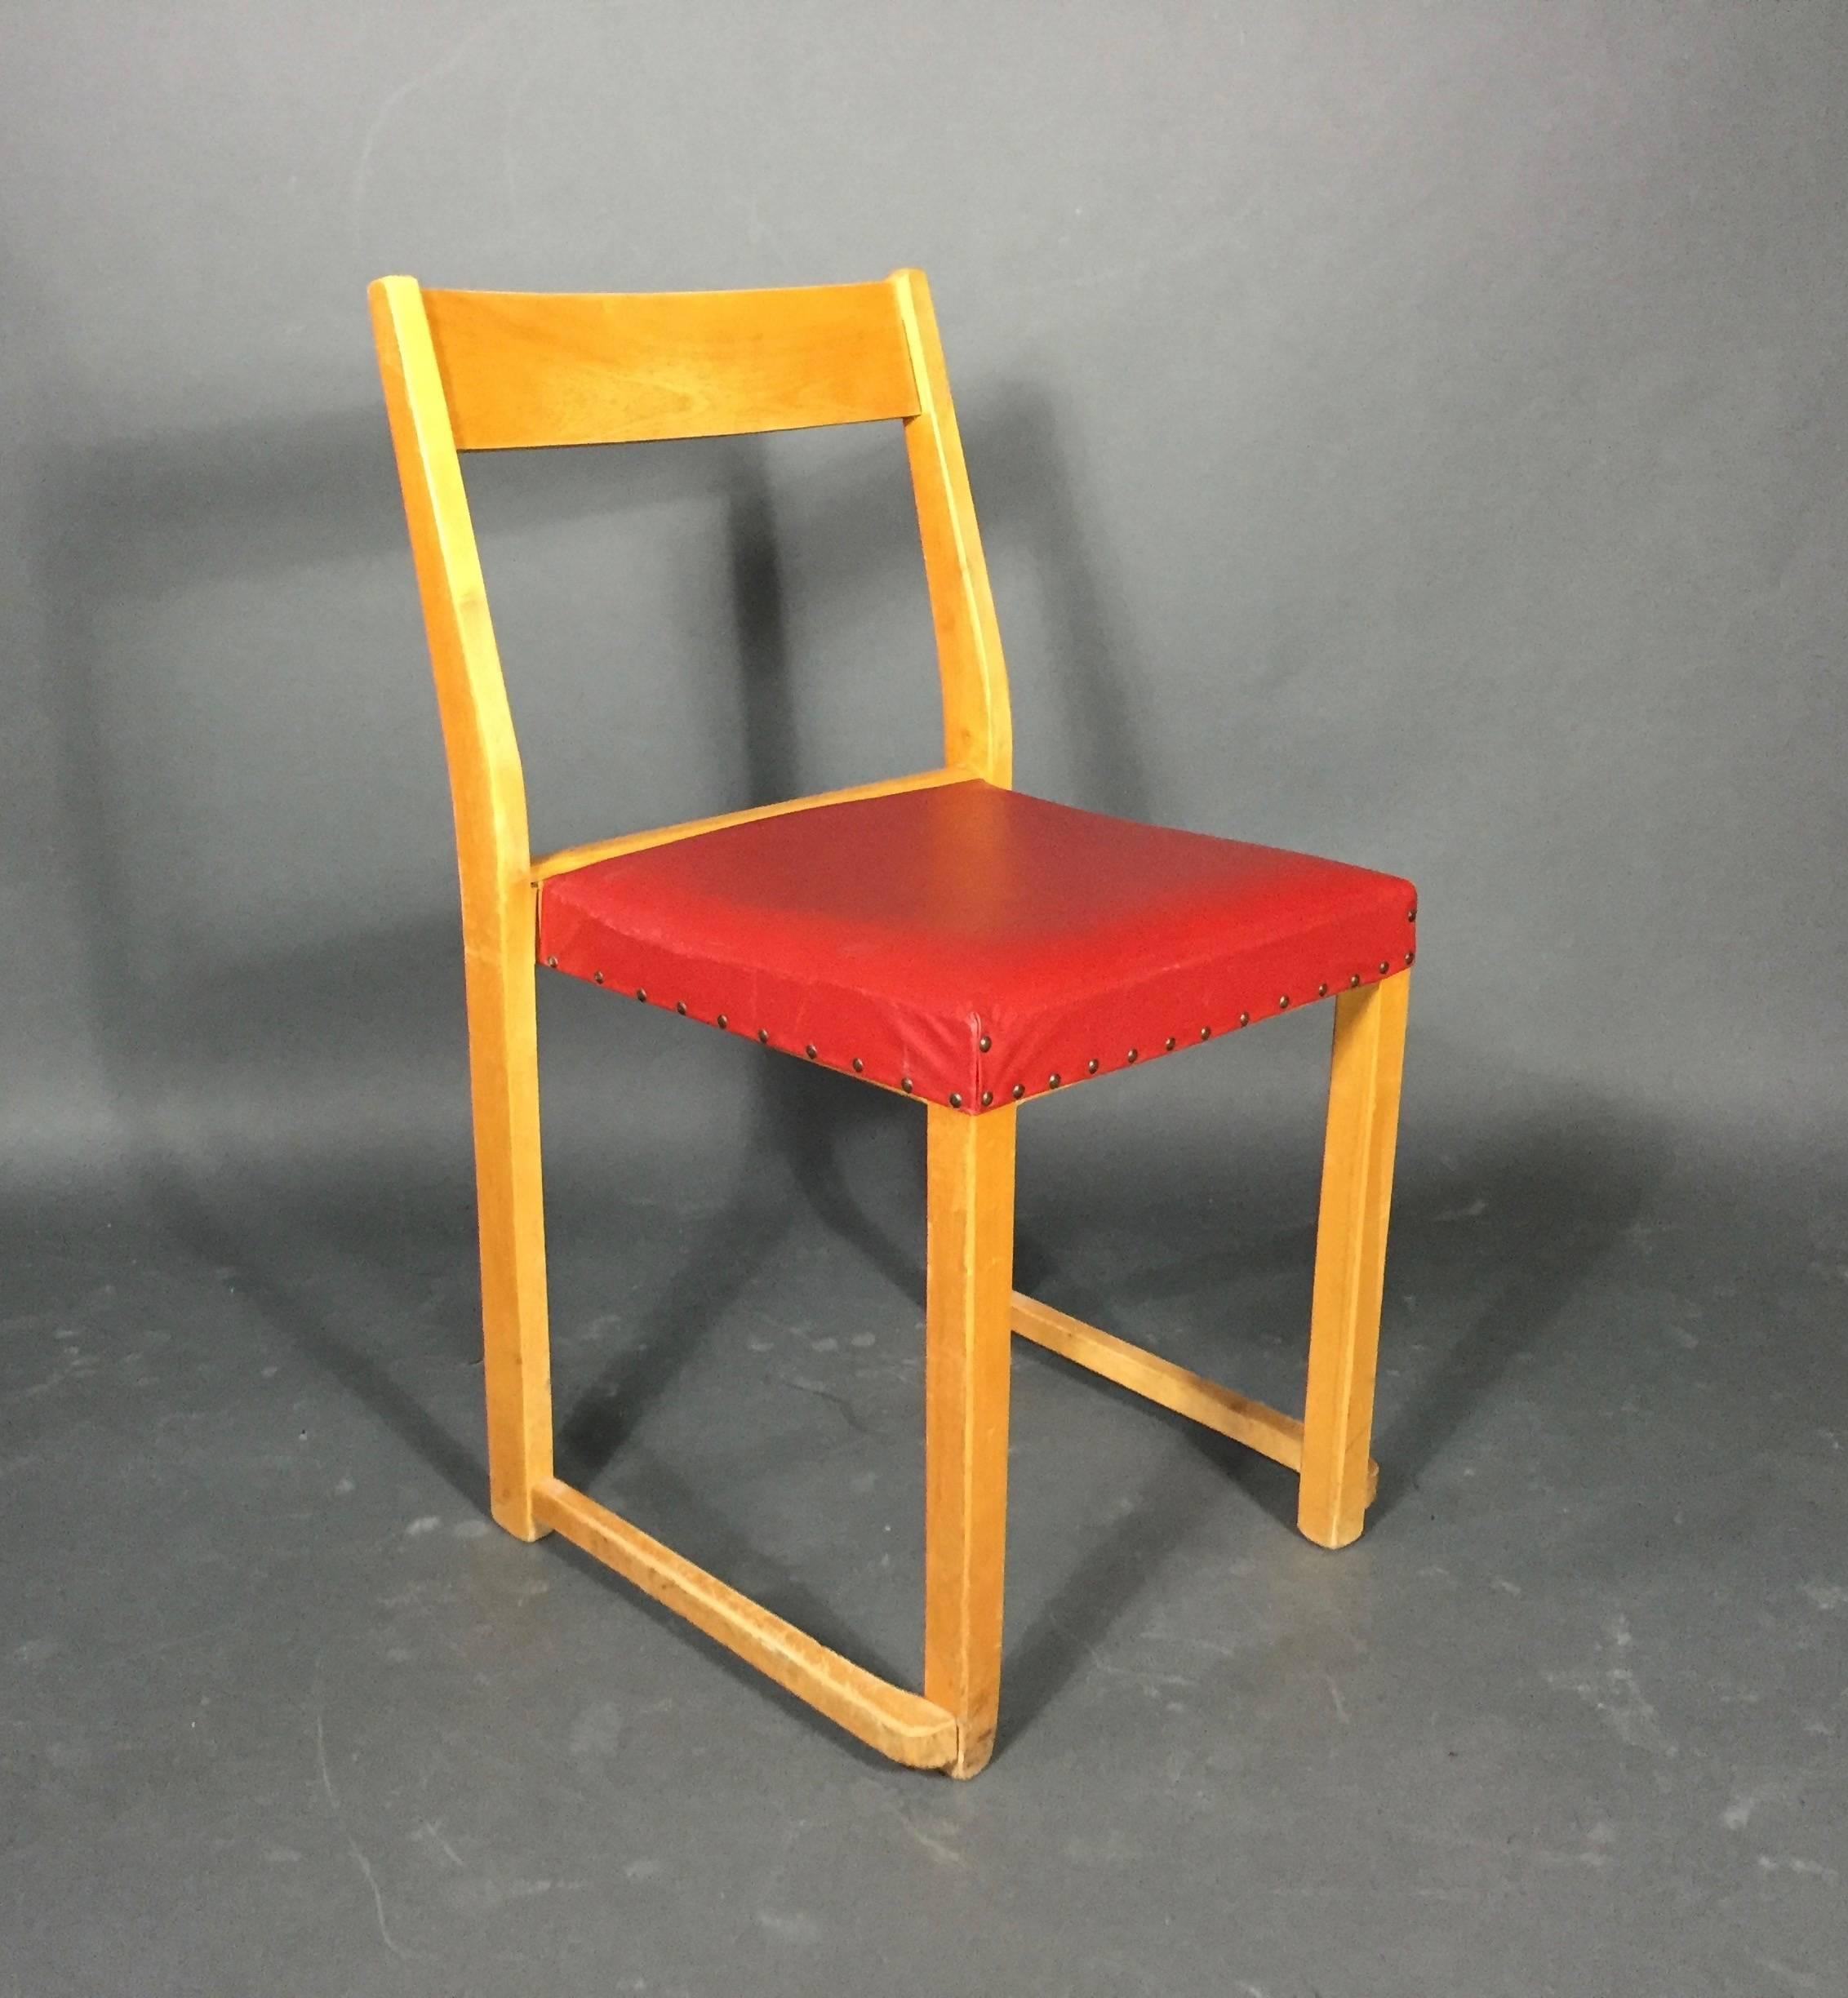 Mid-20th Century Sven Markelius Birch Stacking Chairs for Bodafors Sweden, Designed 1931